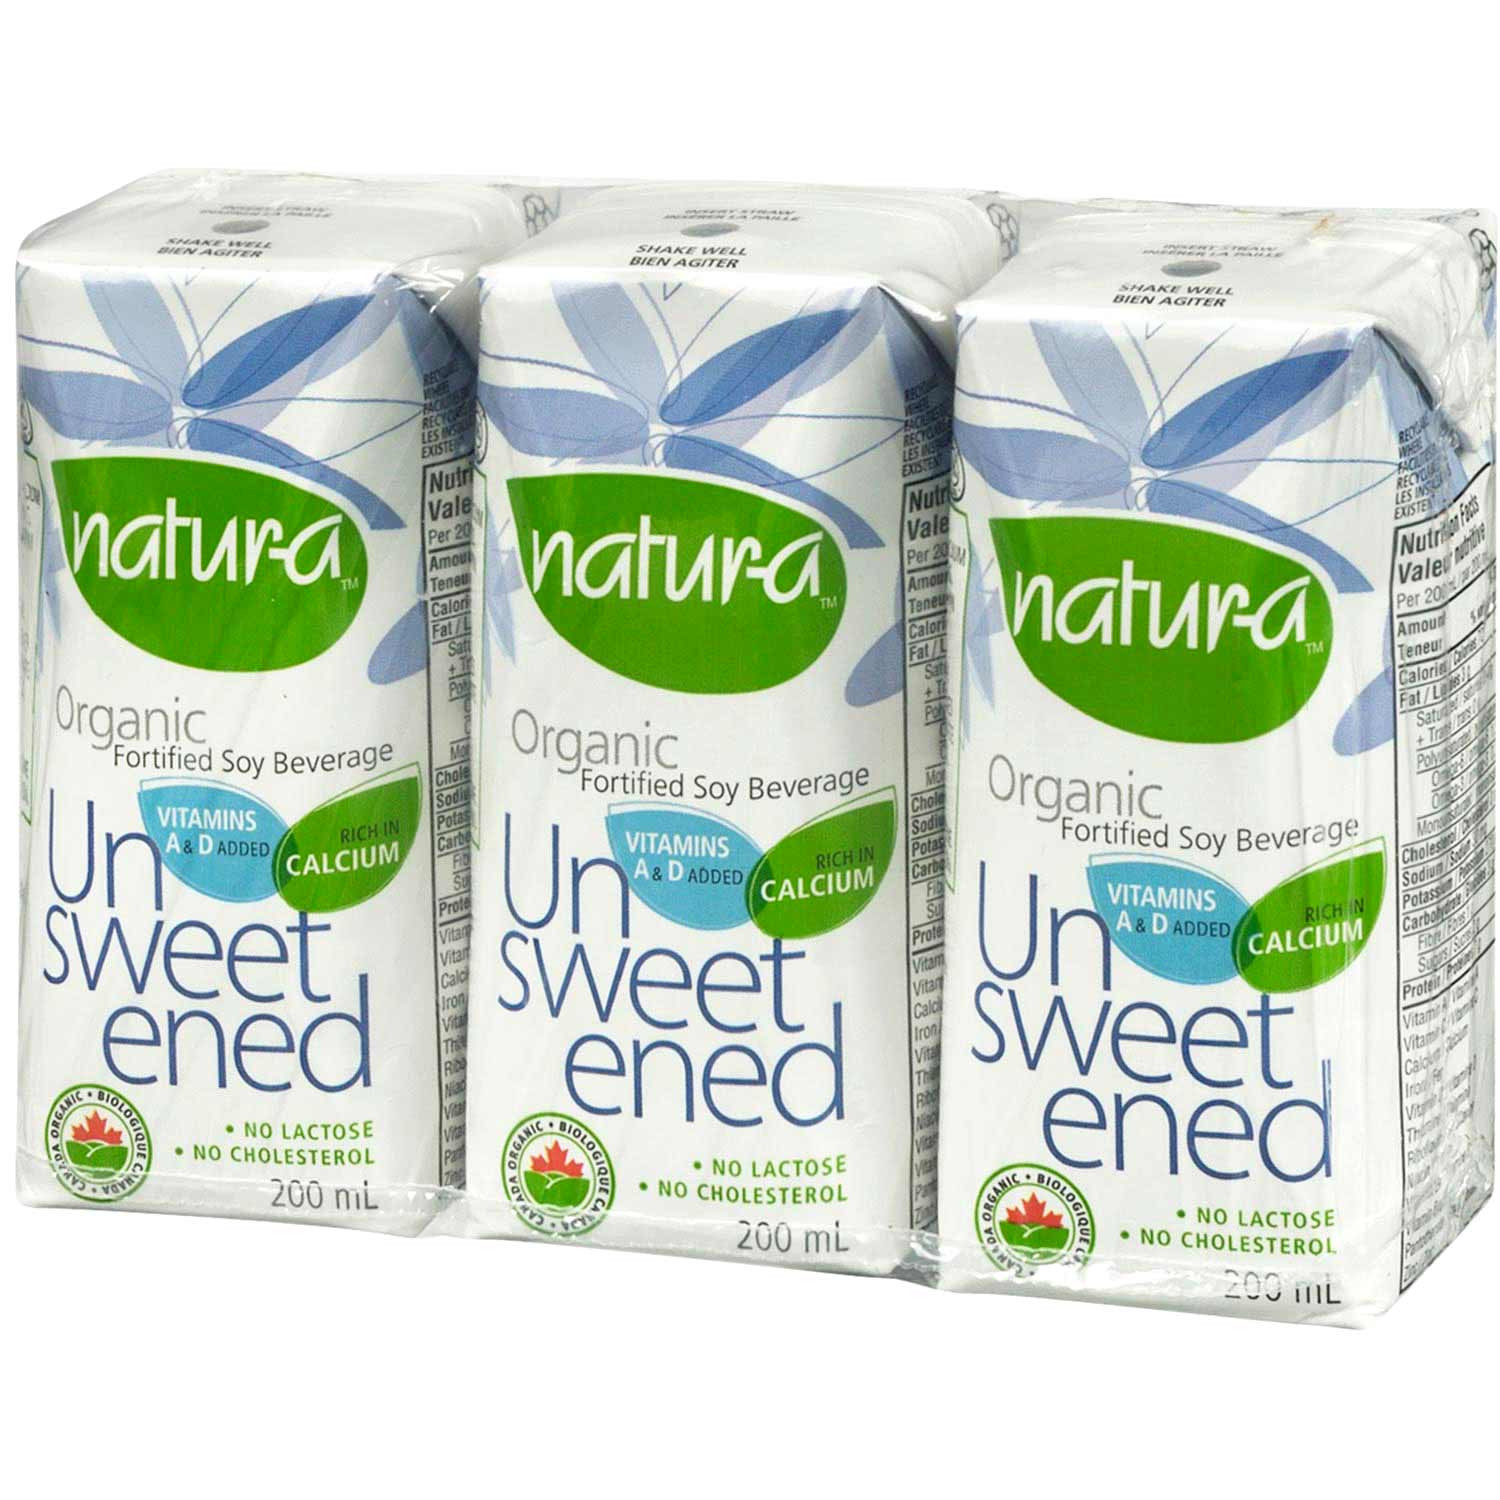 Natur-a Enriched Soy Beverage - Unsweetened (Organic), 200 ml